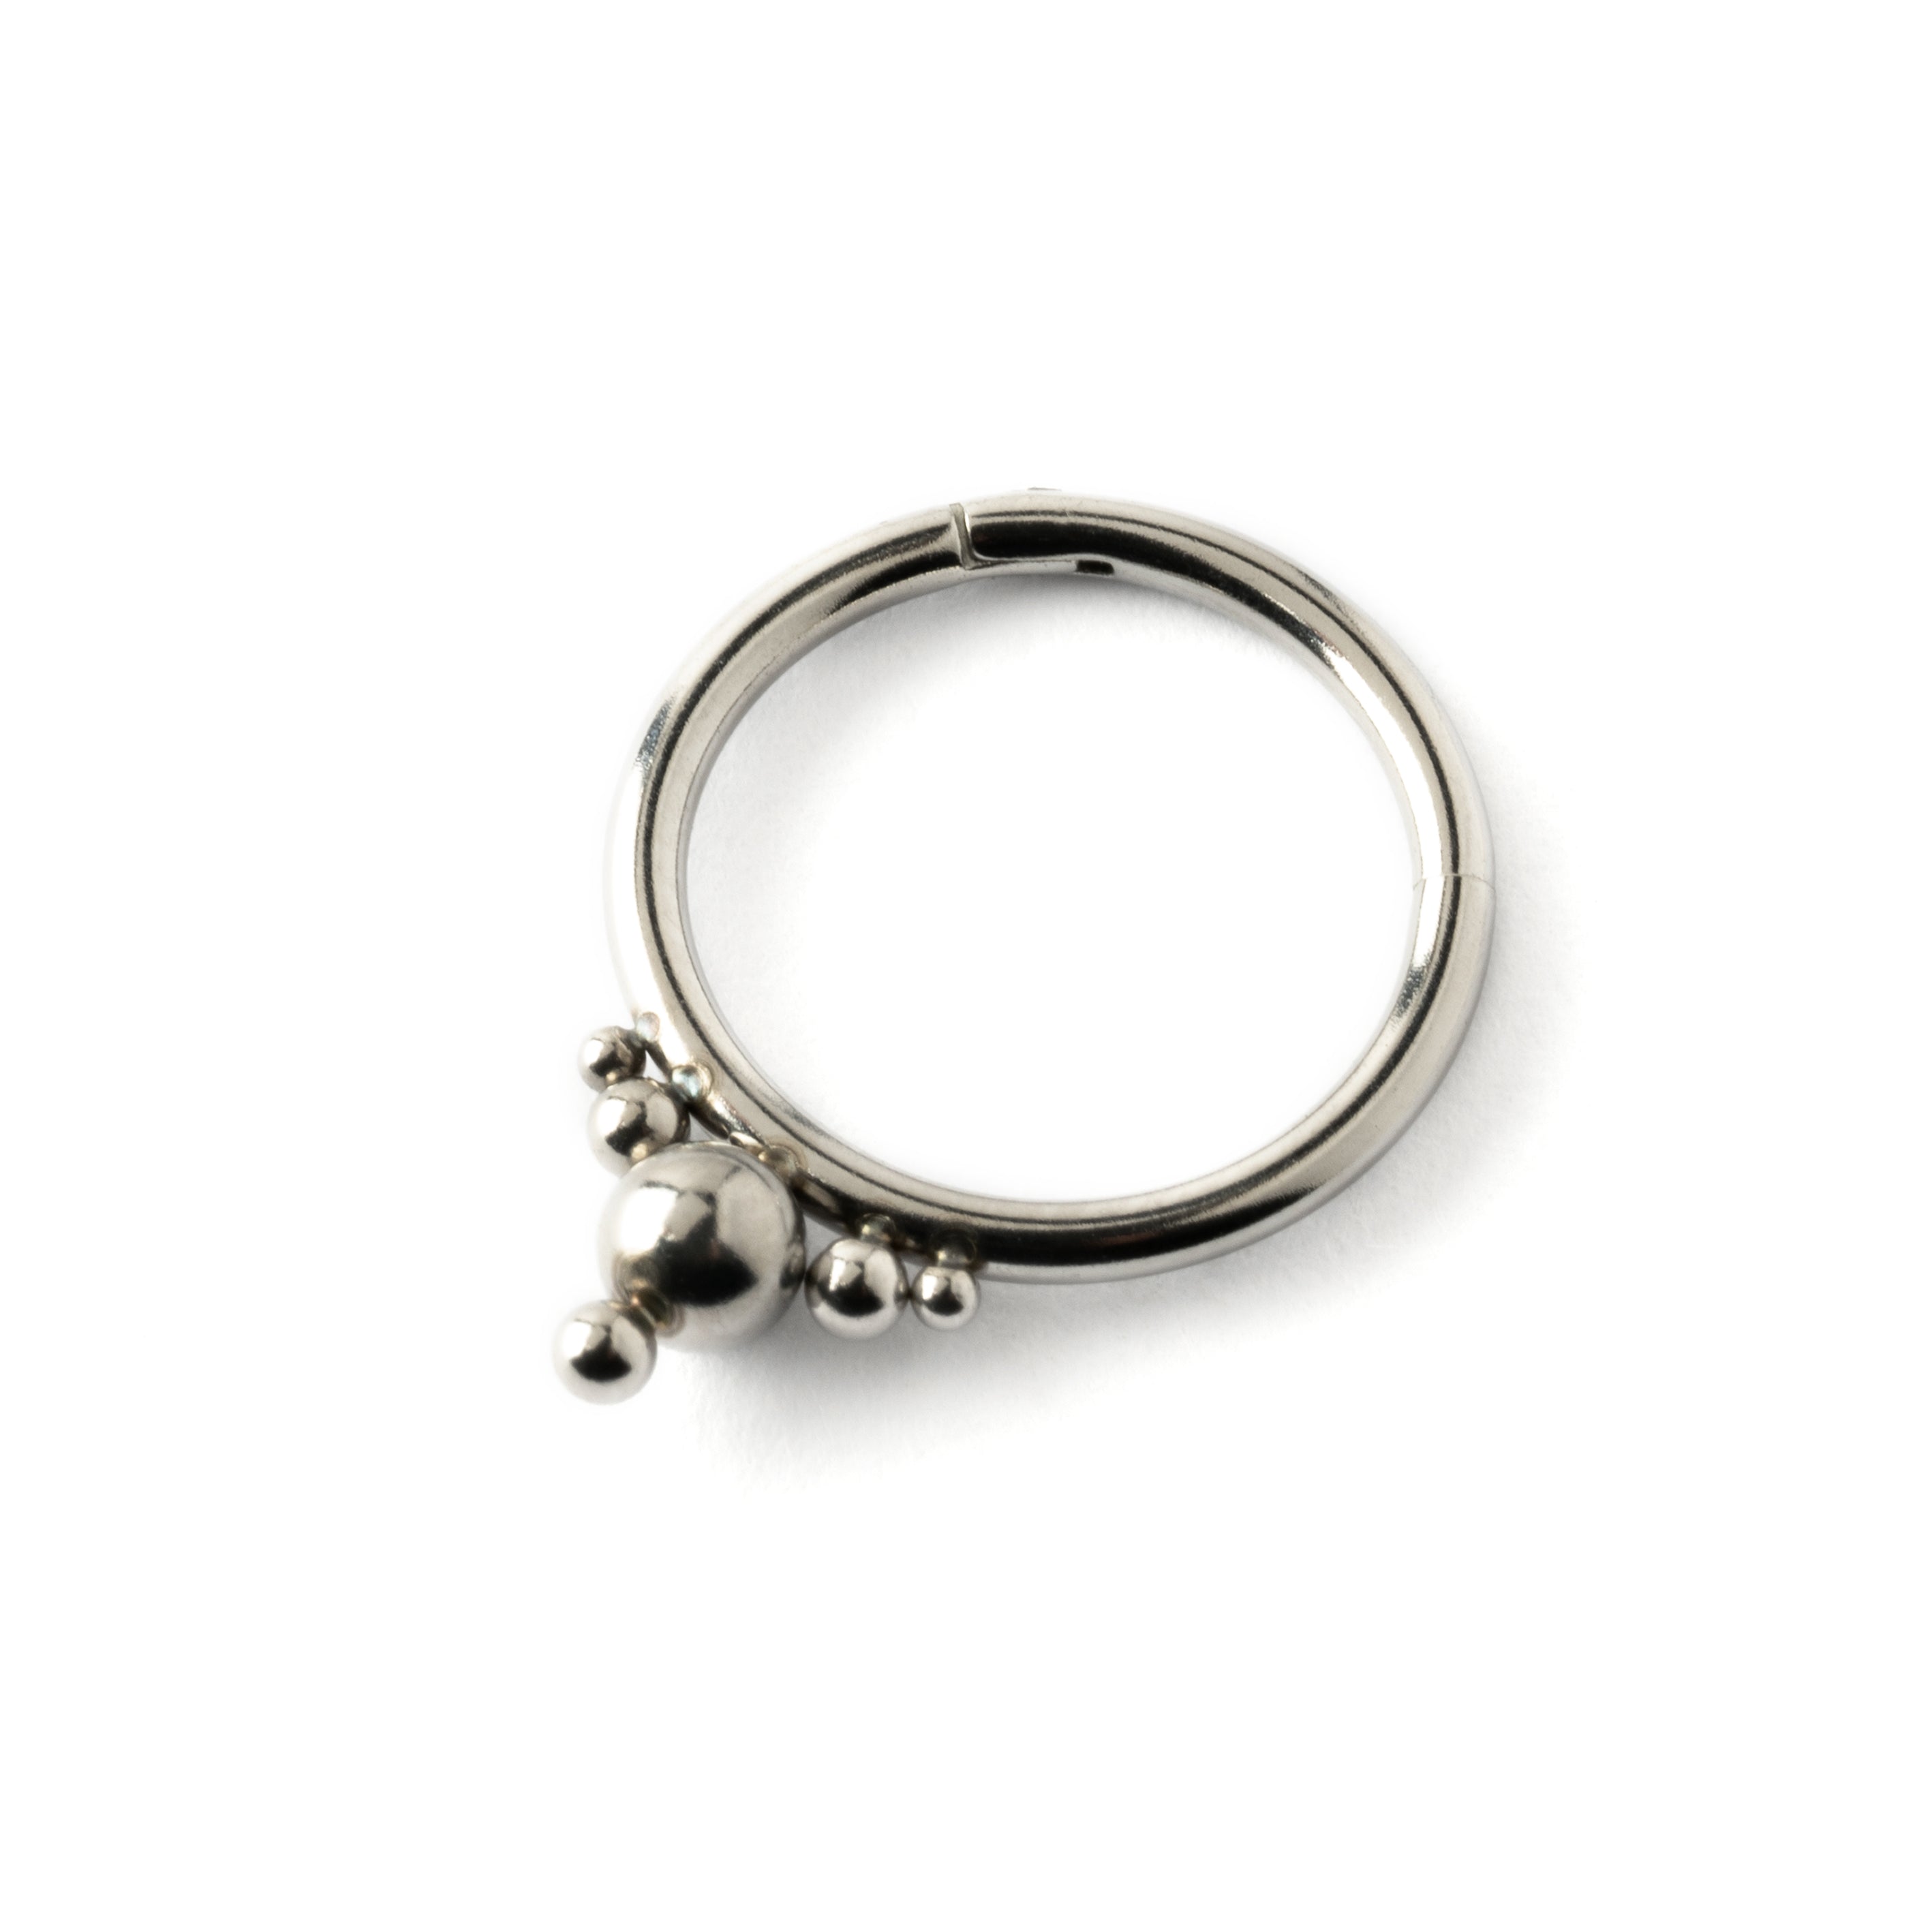 surgical steel Malee septum clicker right side view